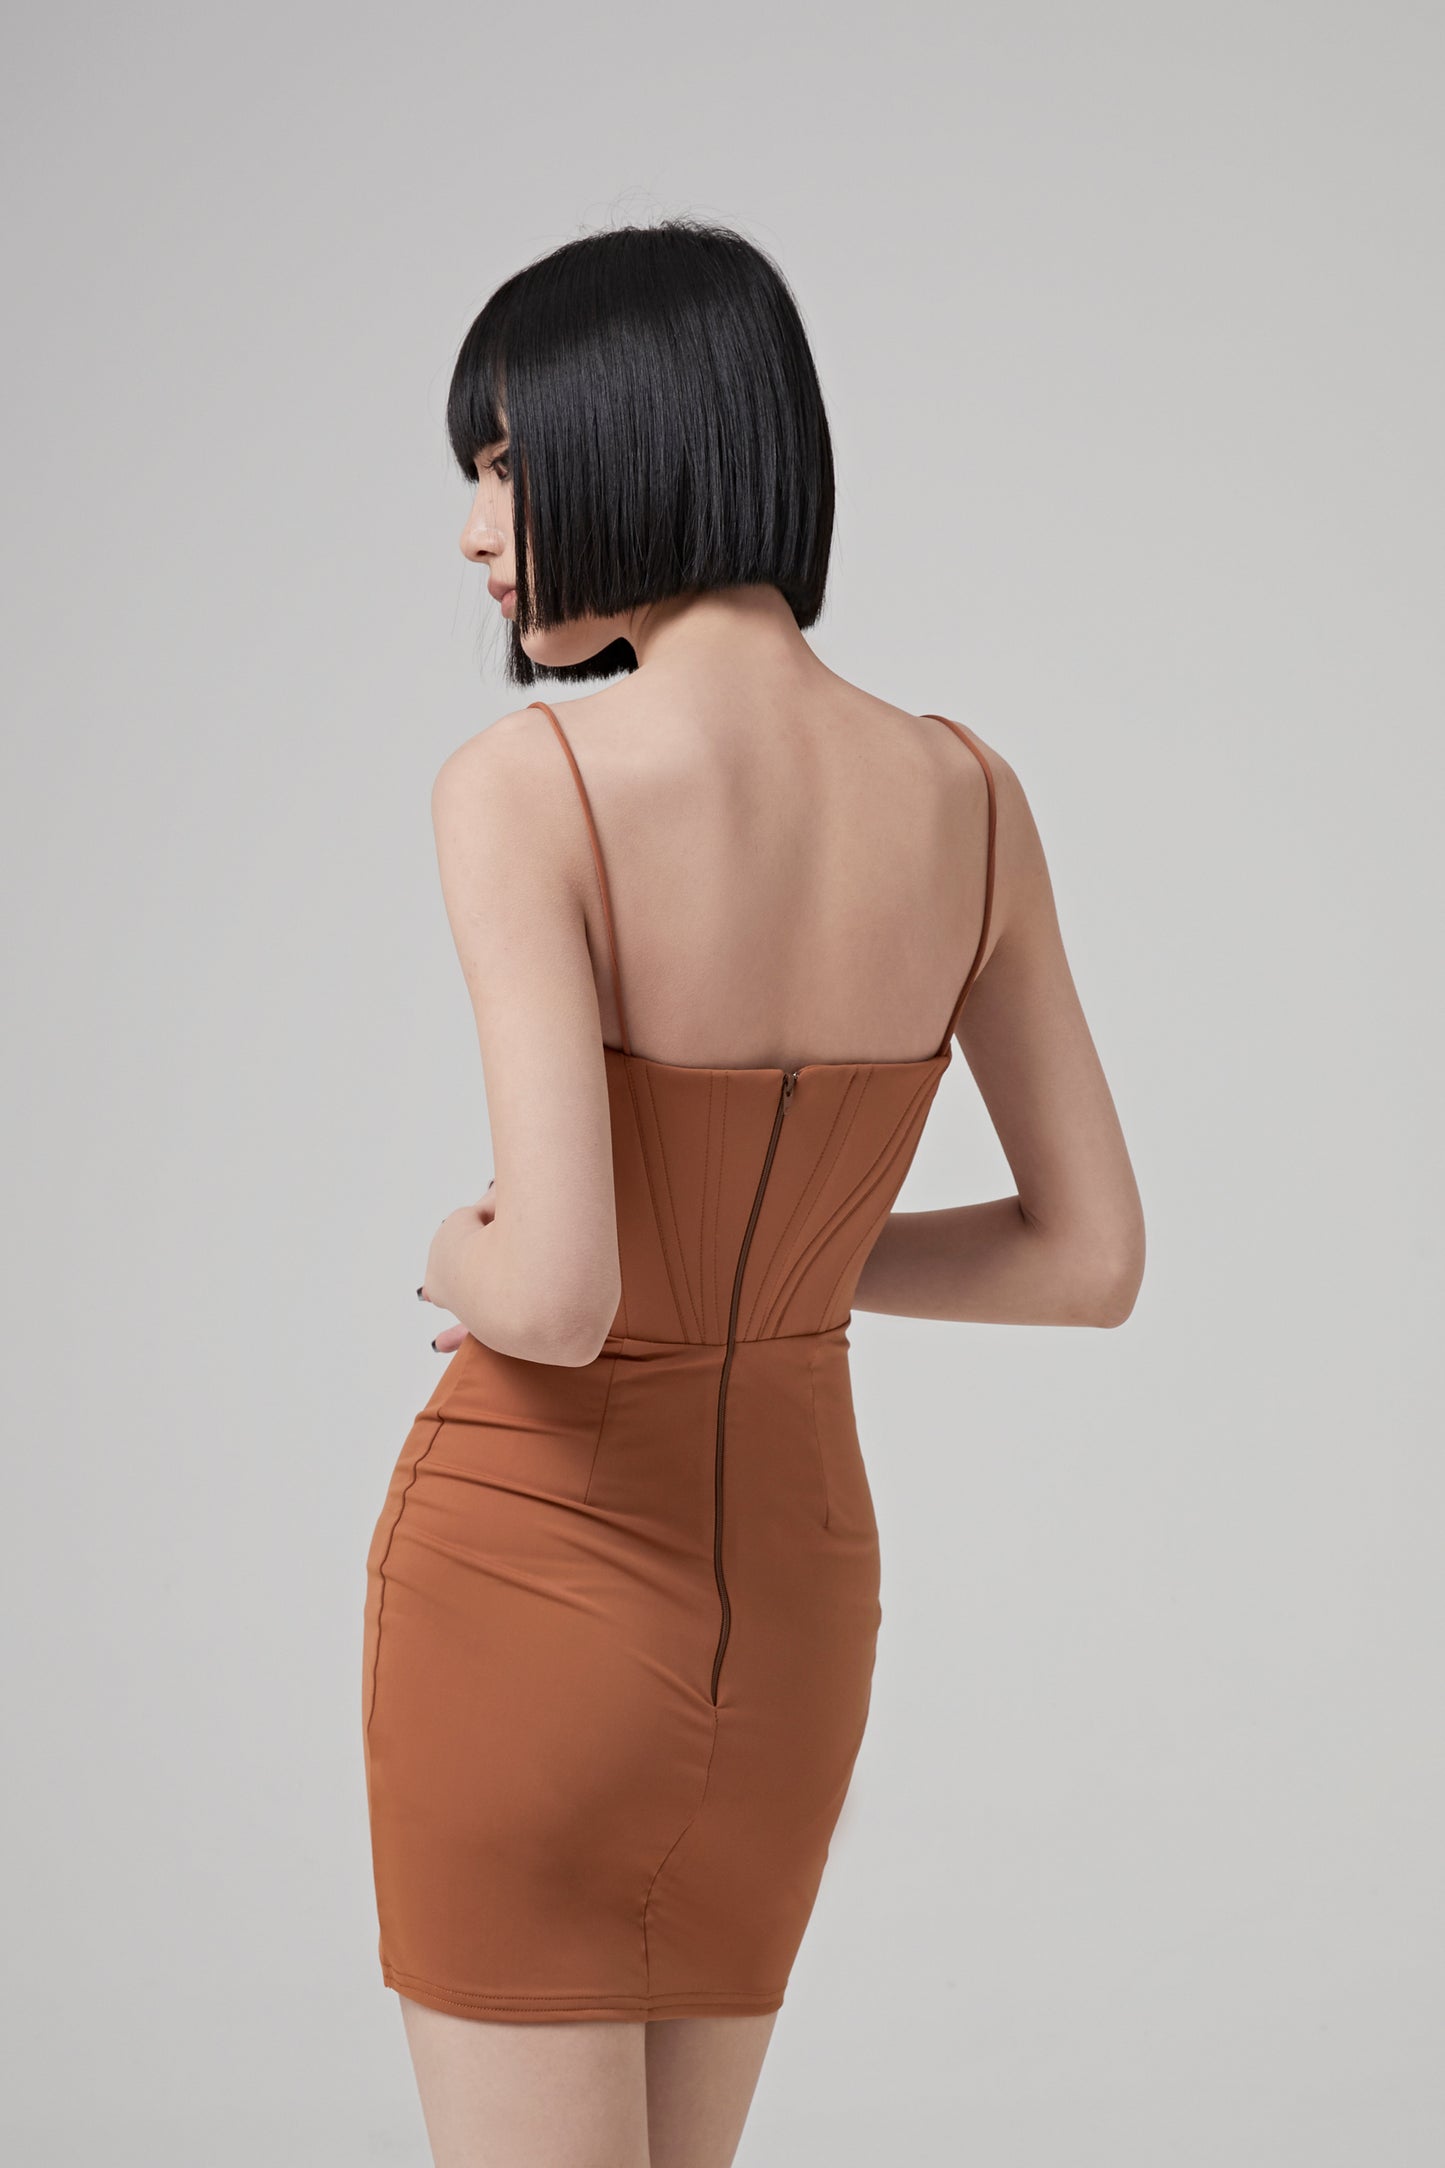 TIGHT OPEN BACK SEXY DRESS